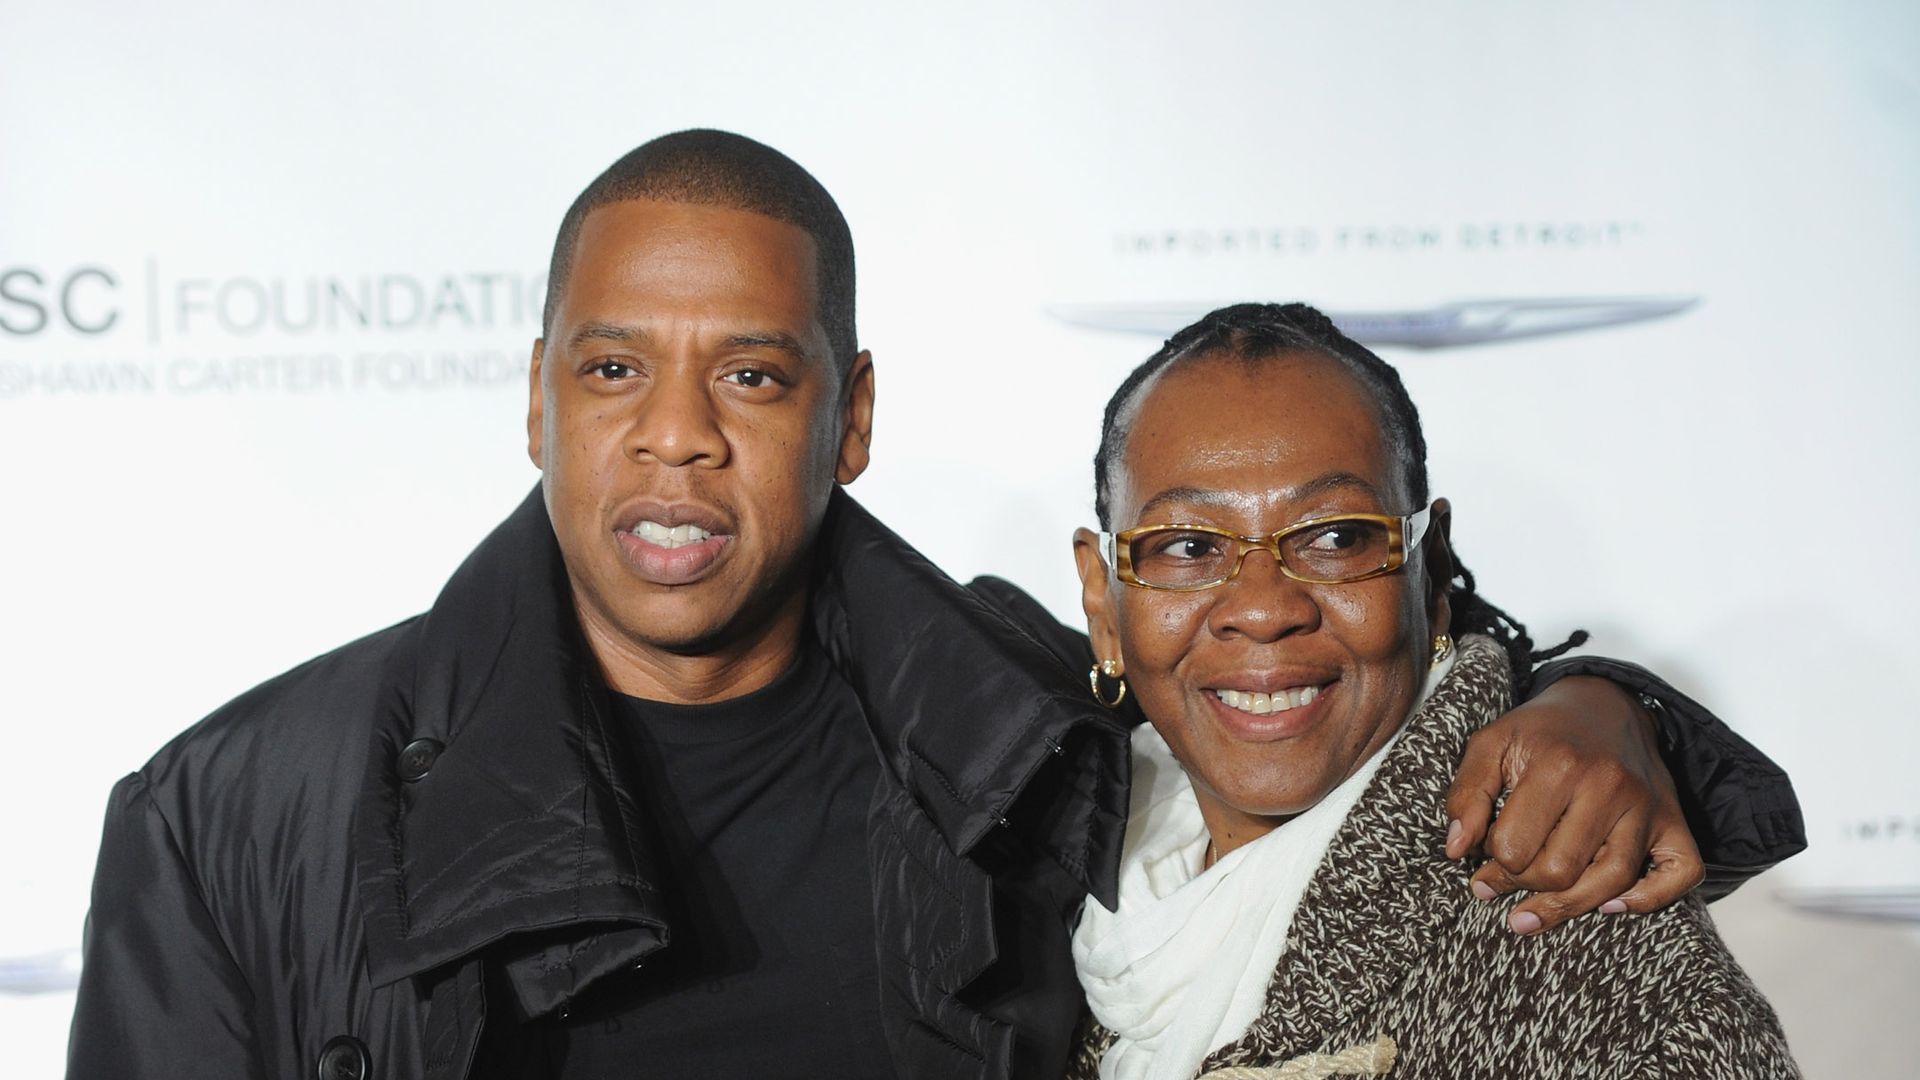 Jay-Z poses with his mother, Gloria Carter during an evening of "Making The Ordinary Extraordinary" hosted by The Shawn Carter Foundation at Pier 54 on September 29, 2011 in New York City